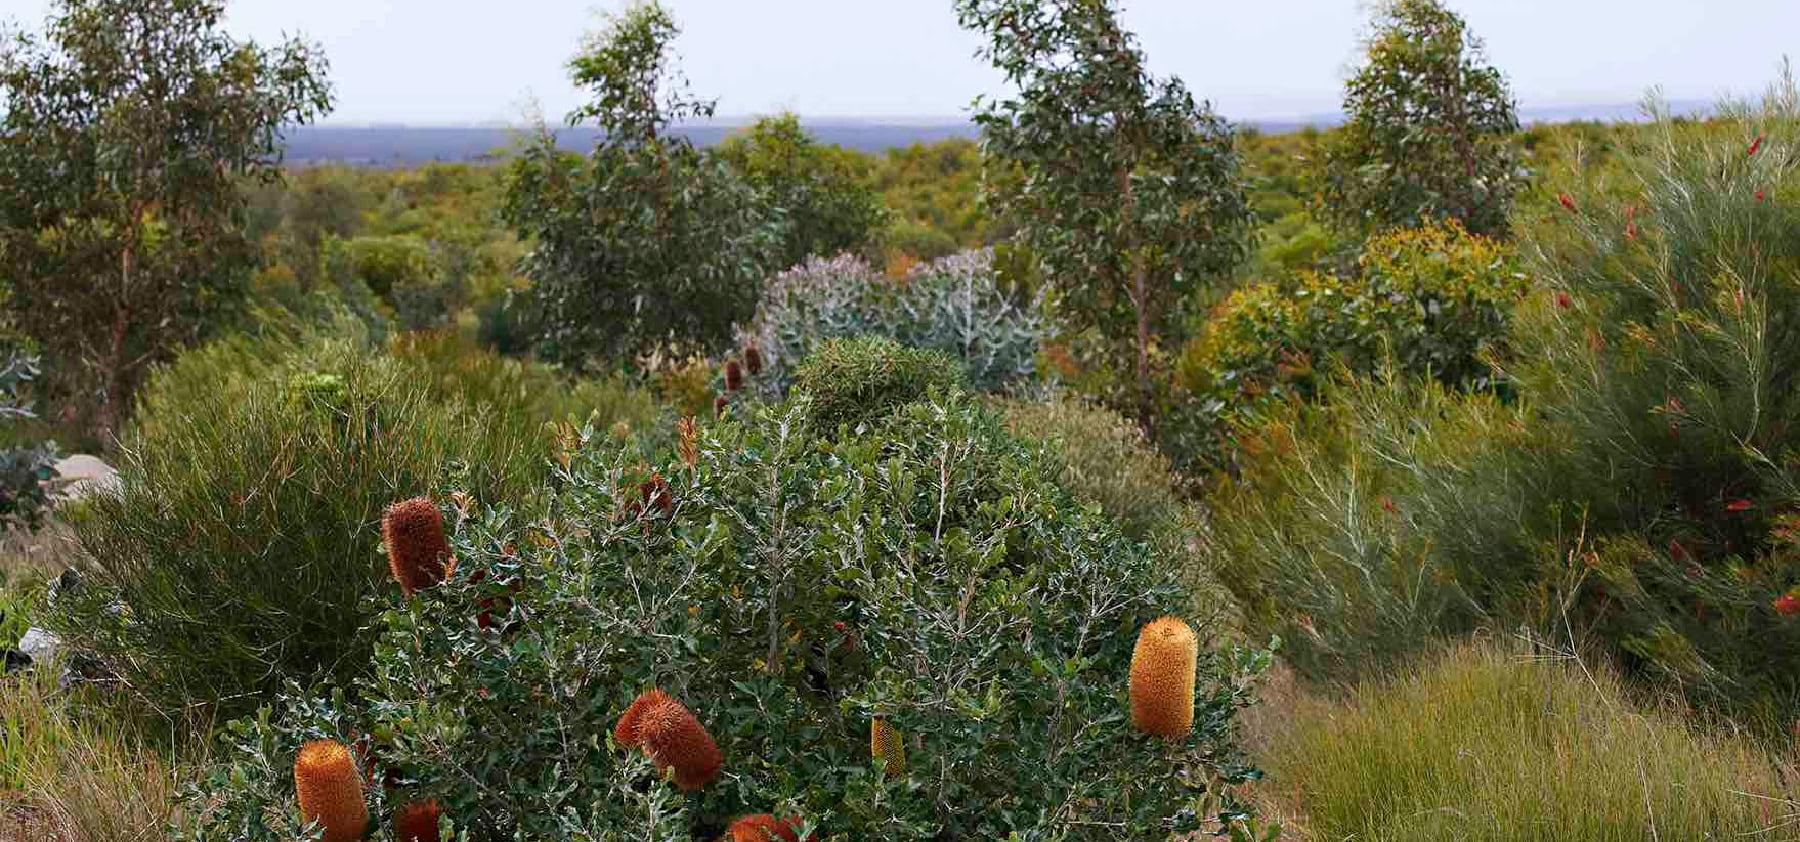 Thick shrubs and bushes with yellow flowering banksia in foreground